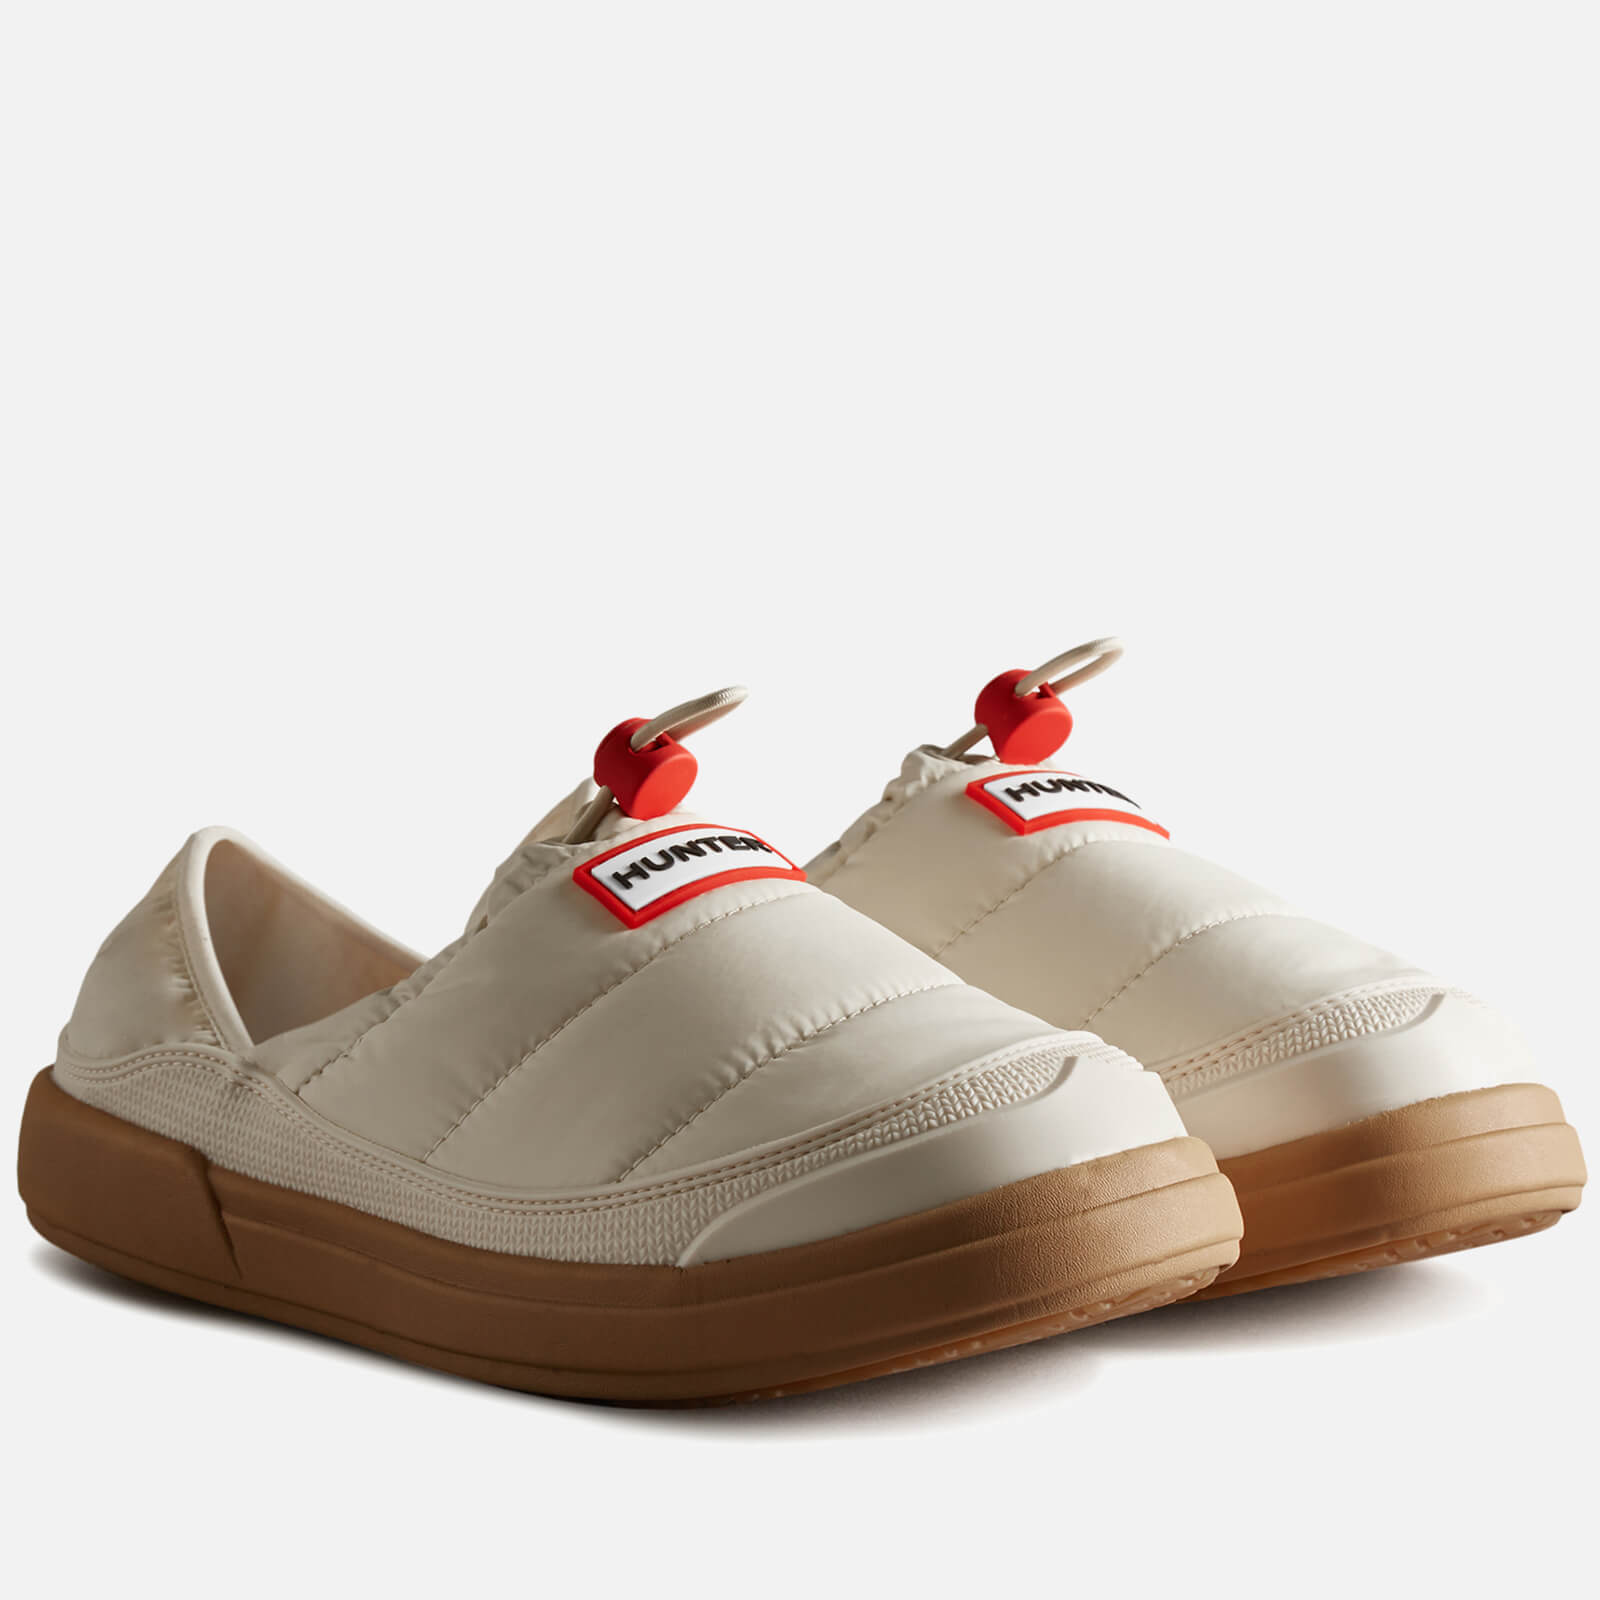 Hunter Women's In/Out Slippers - White Willow/Gum - UK 3